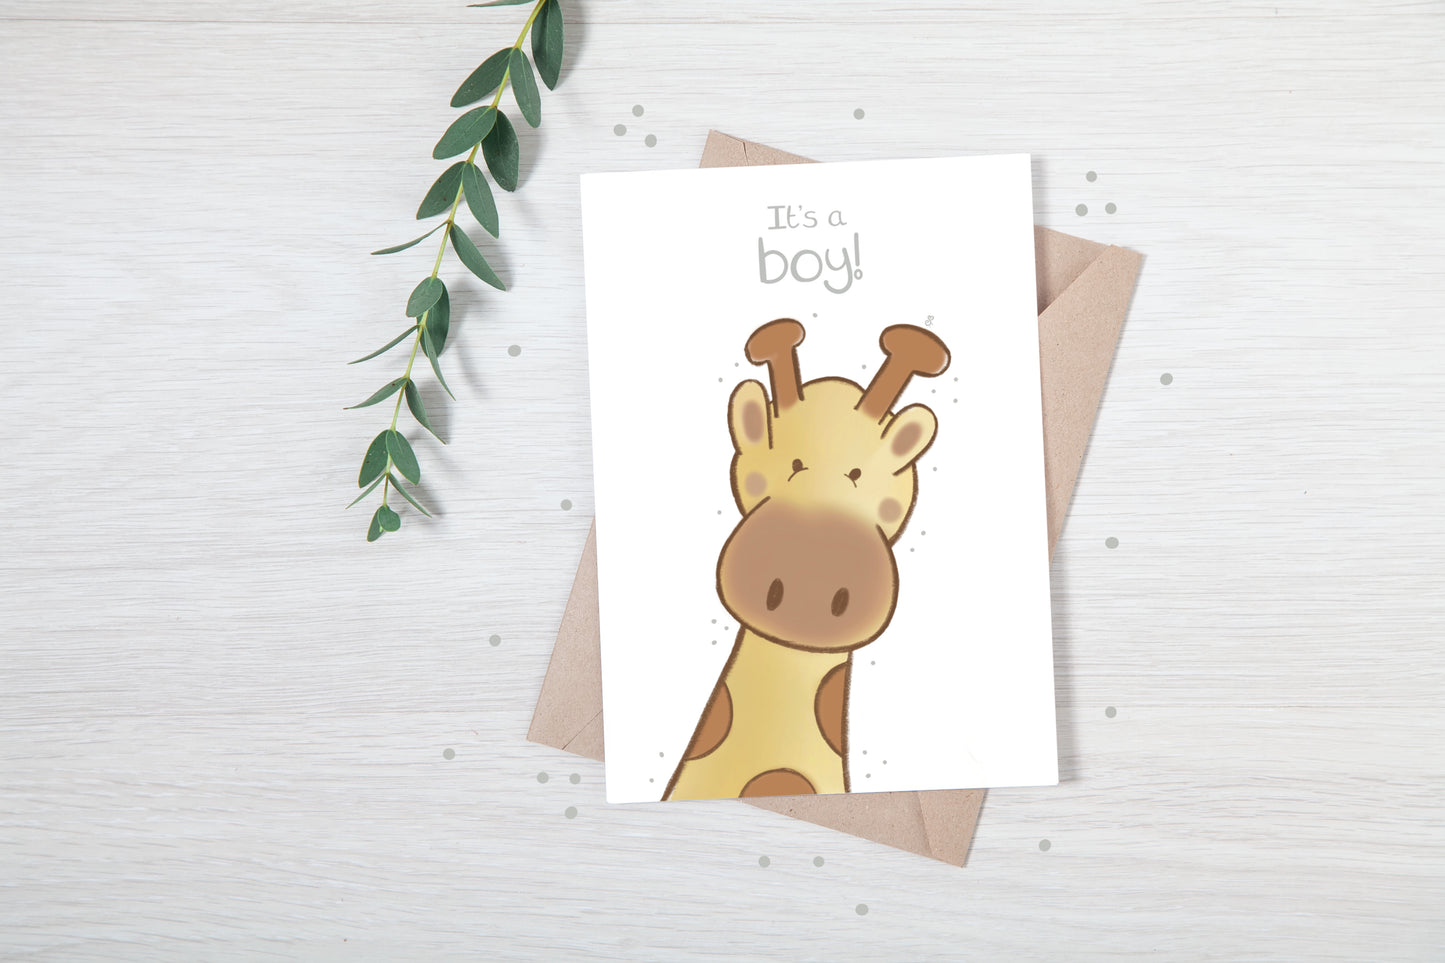 Handmade luxury new baby christening greetings card with a safari theme baby giraffe popping up from the bottom with the title &quote "it's a boy" on a white background, with a kraft envelope